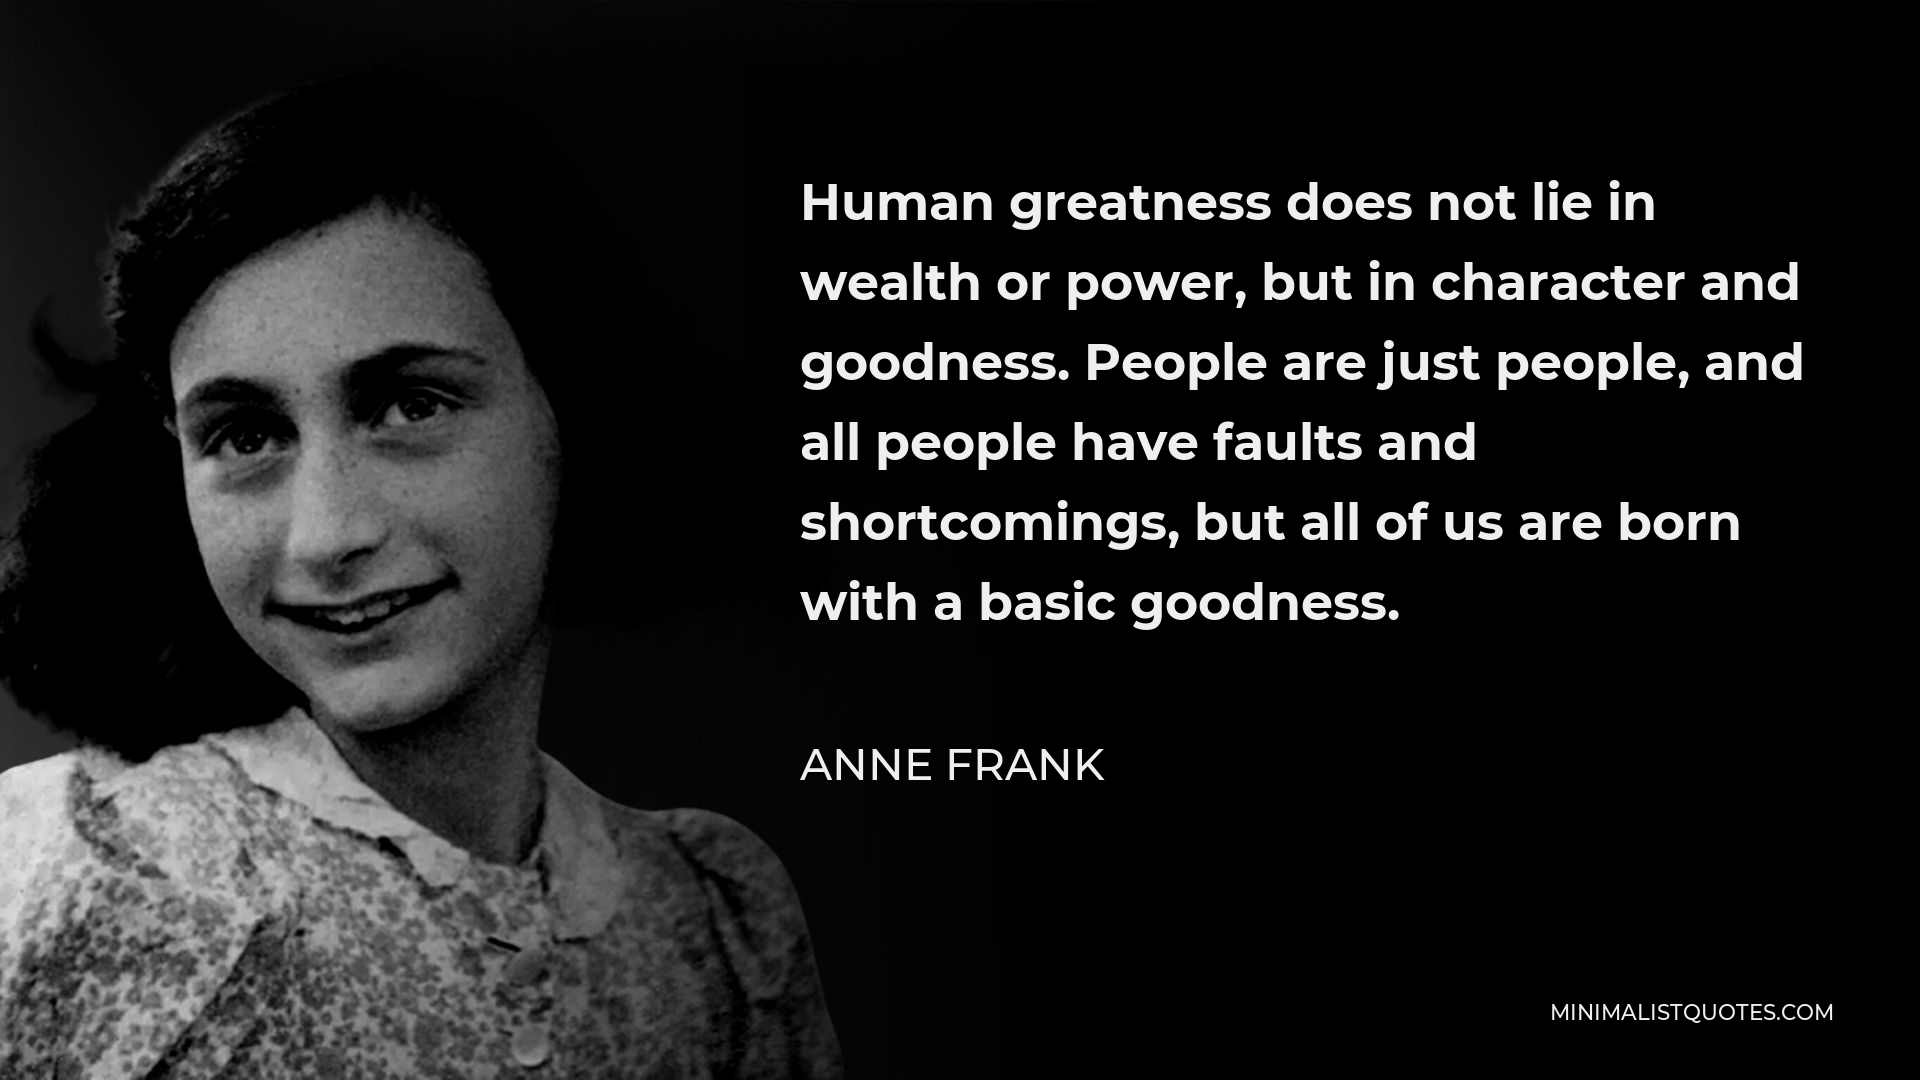 Anne Frank Quote - Human greatness does not lie in wealth or power, but in character and goodness. People are just people, and all people have faults and shortcomings, but all of us are born with a basic goodness.